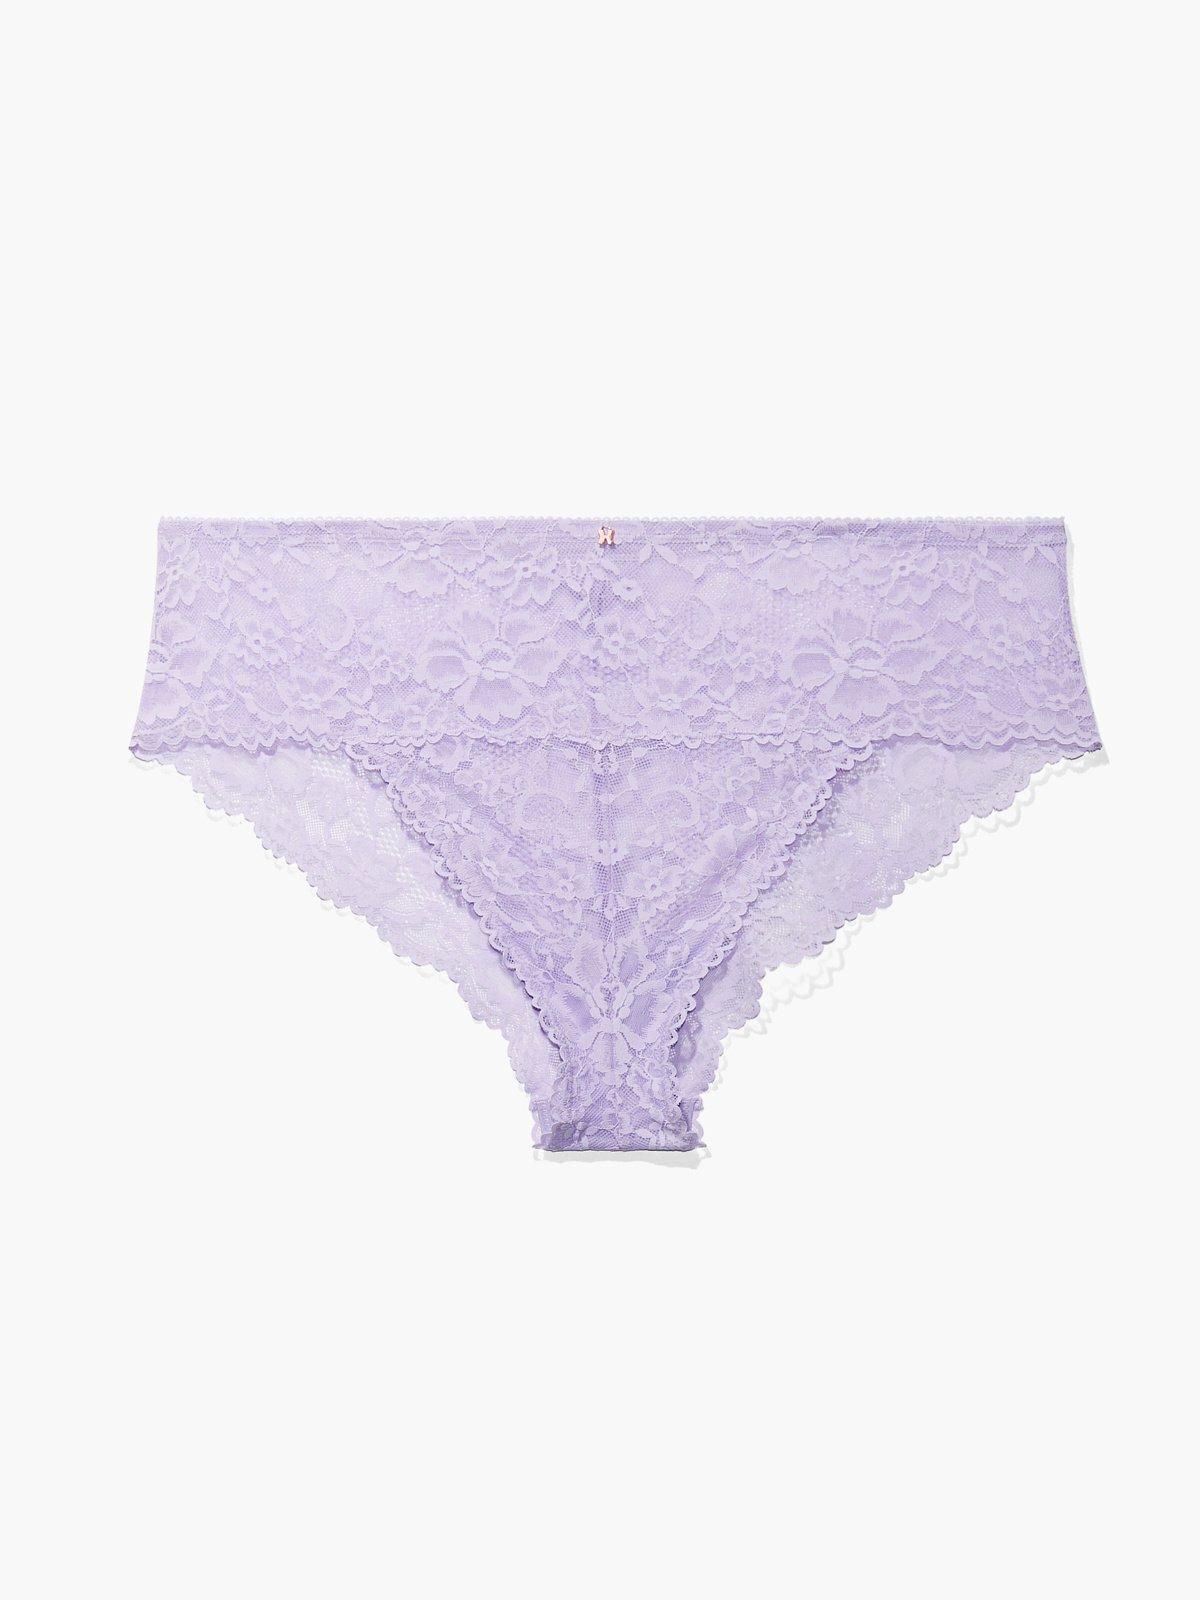 https://cdn.savagex.com/media/images/products/UD2147014-5210/FLORAL-LACE-CHEEKY-UD2147014-5210-LAYDOWN-1200x1600.jpg